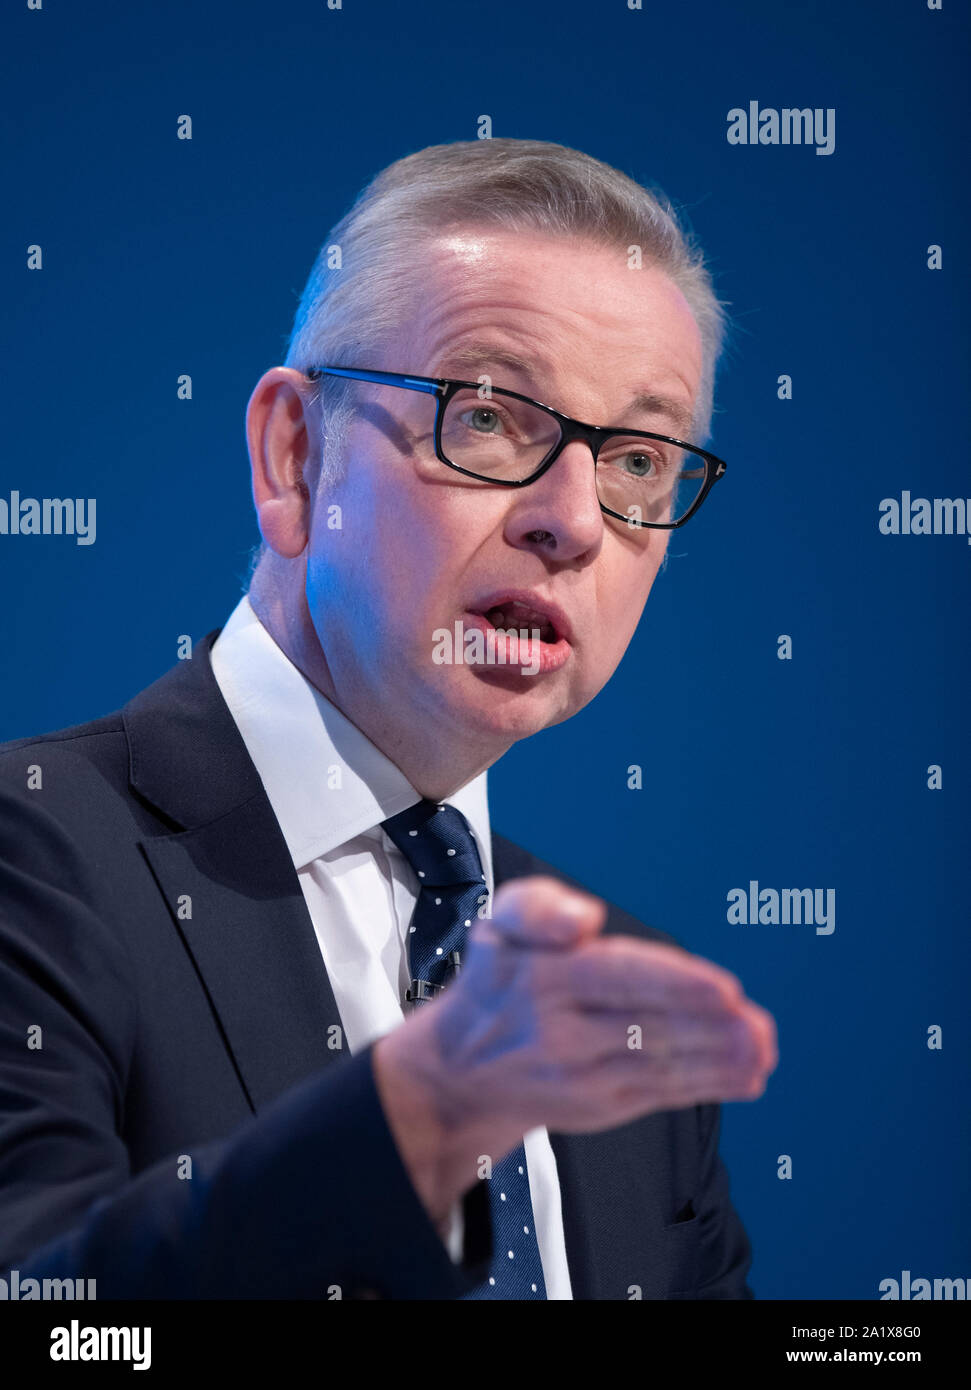 Manchester, UK. 29th September 2019. Michael Gove, Chancellor of the Duchy of Lancaster and MP for Surrey Heath speaks at day one of the Conservative Party Conference in Manchester. © Russell Hart/Alamy Live News. Stock Photo